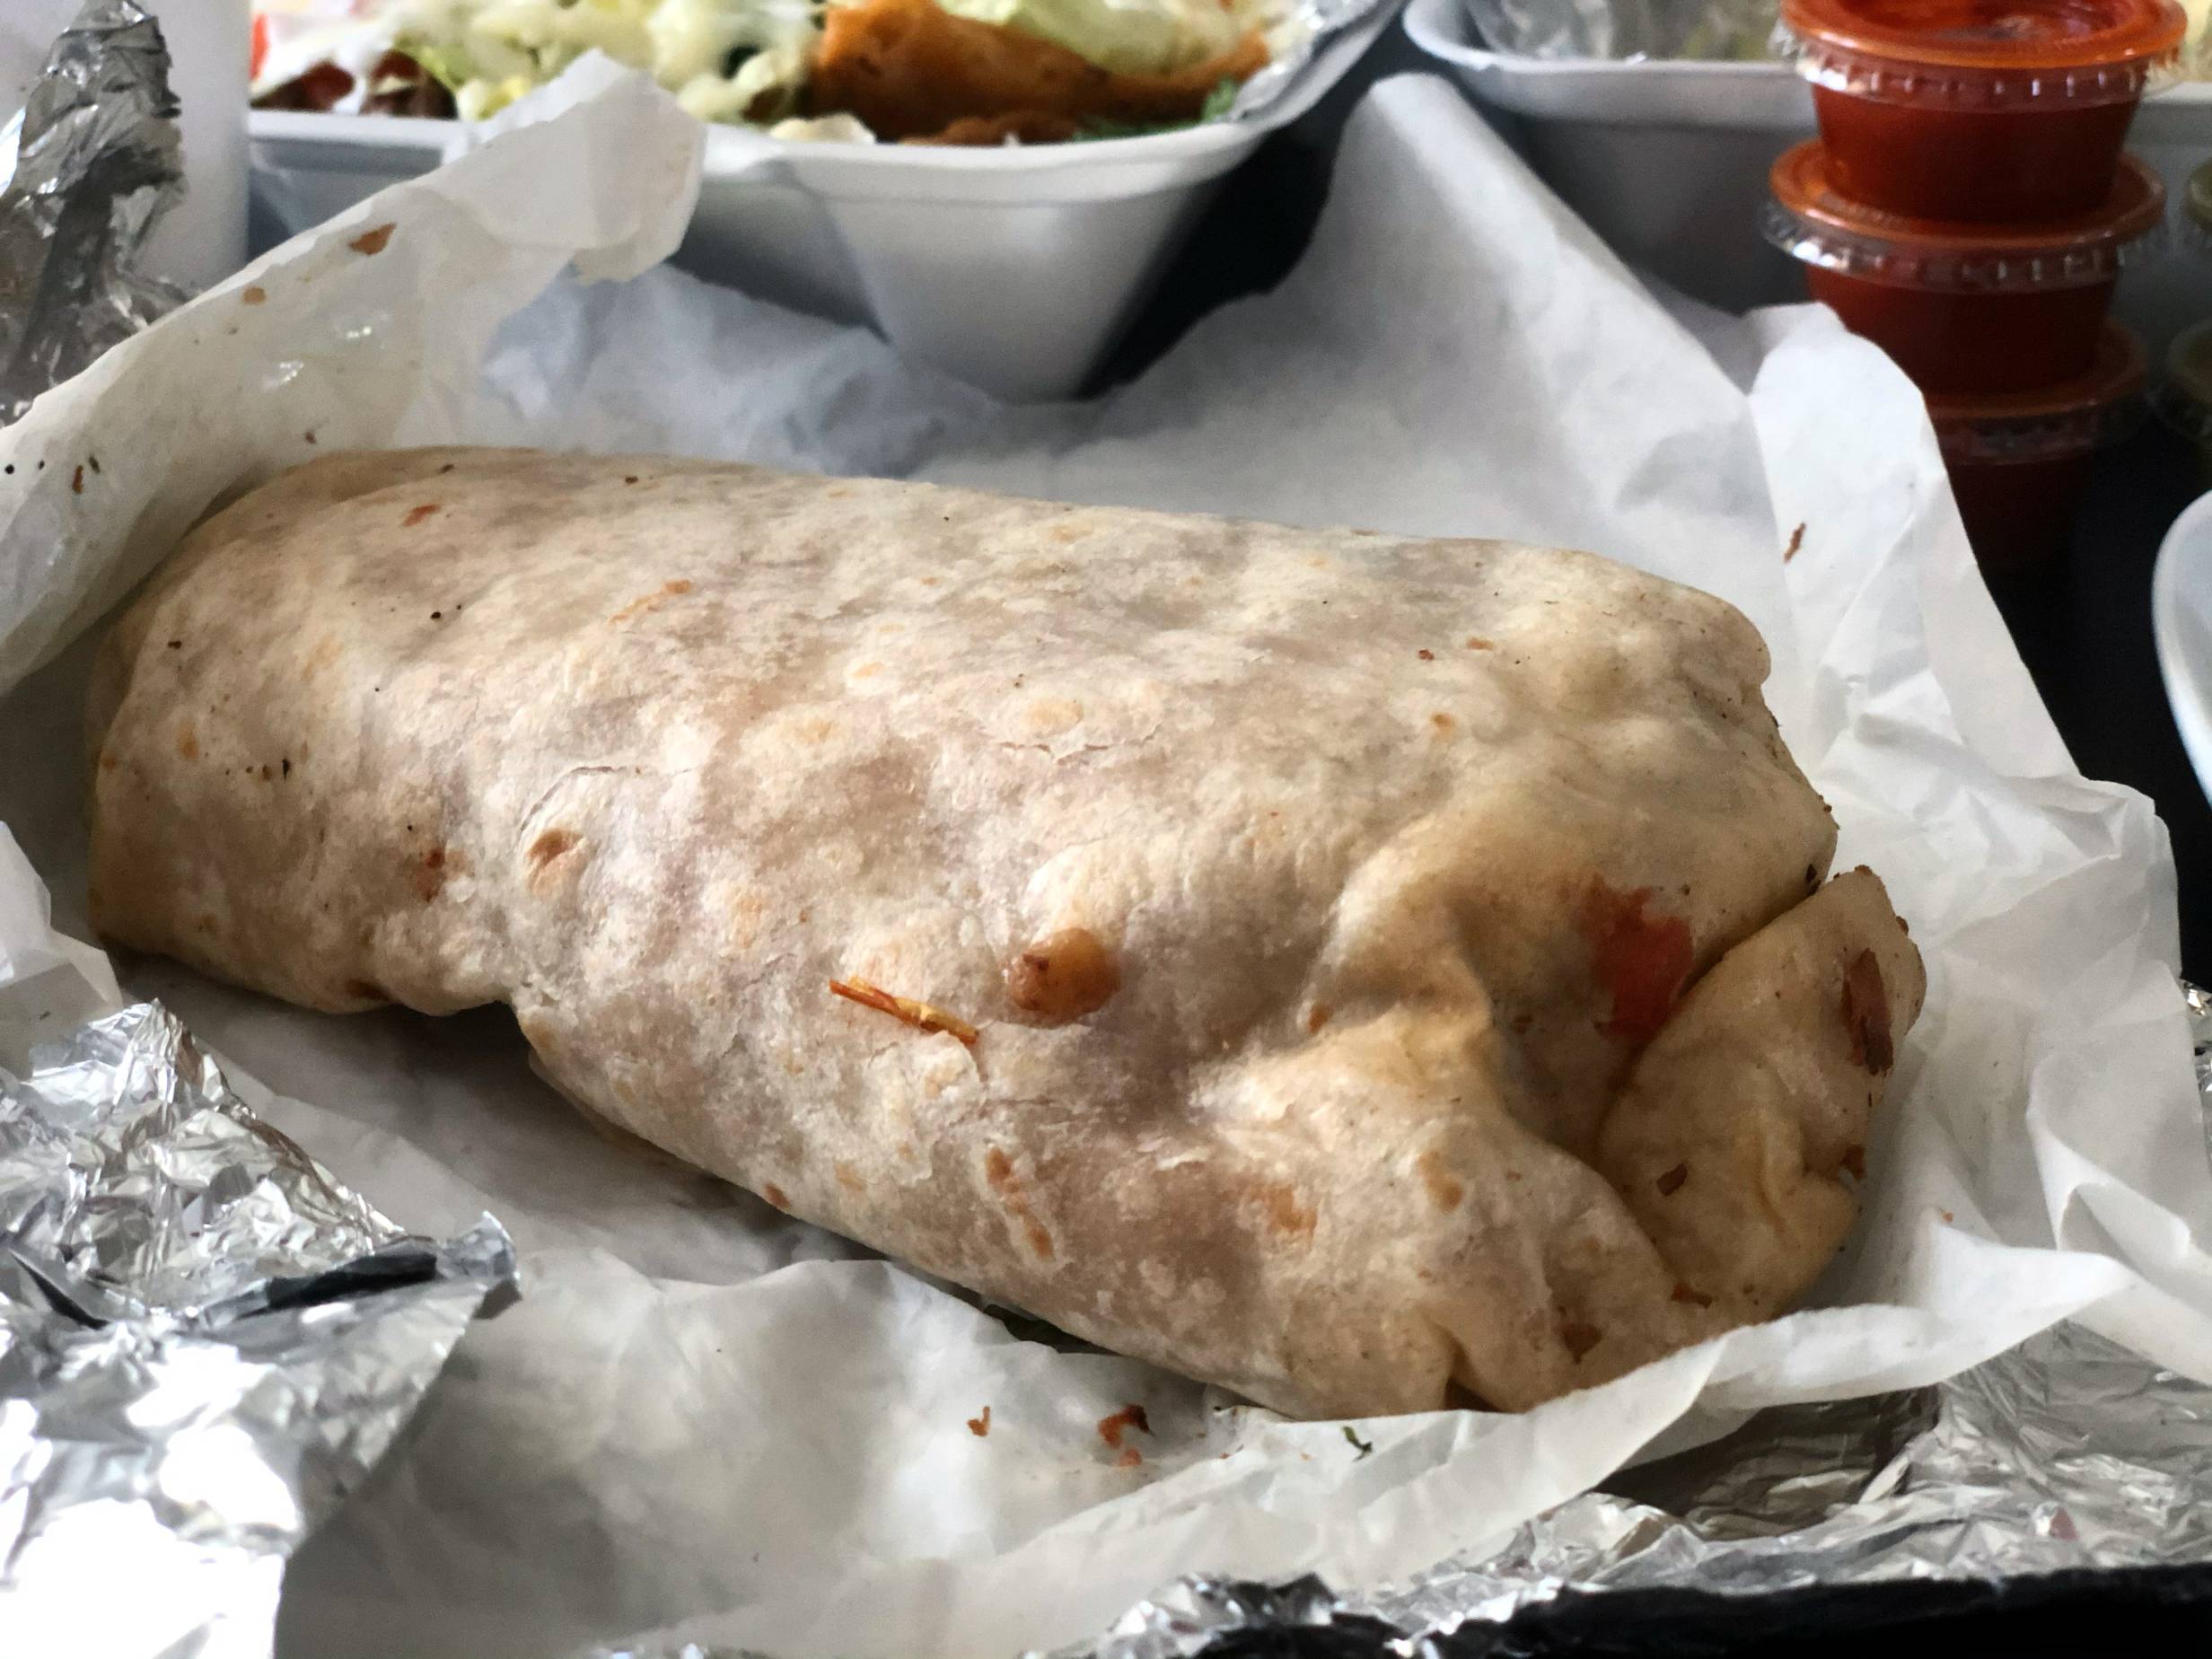 A large burrito rolled lays on a parchment paper on top of tin foil. Photo by Alyssa Buckley.